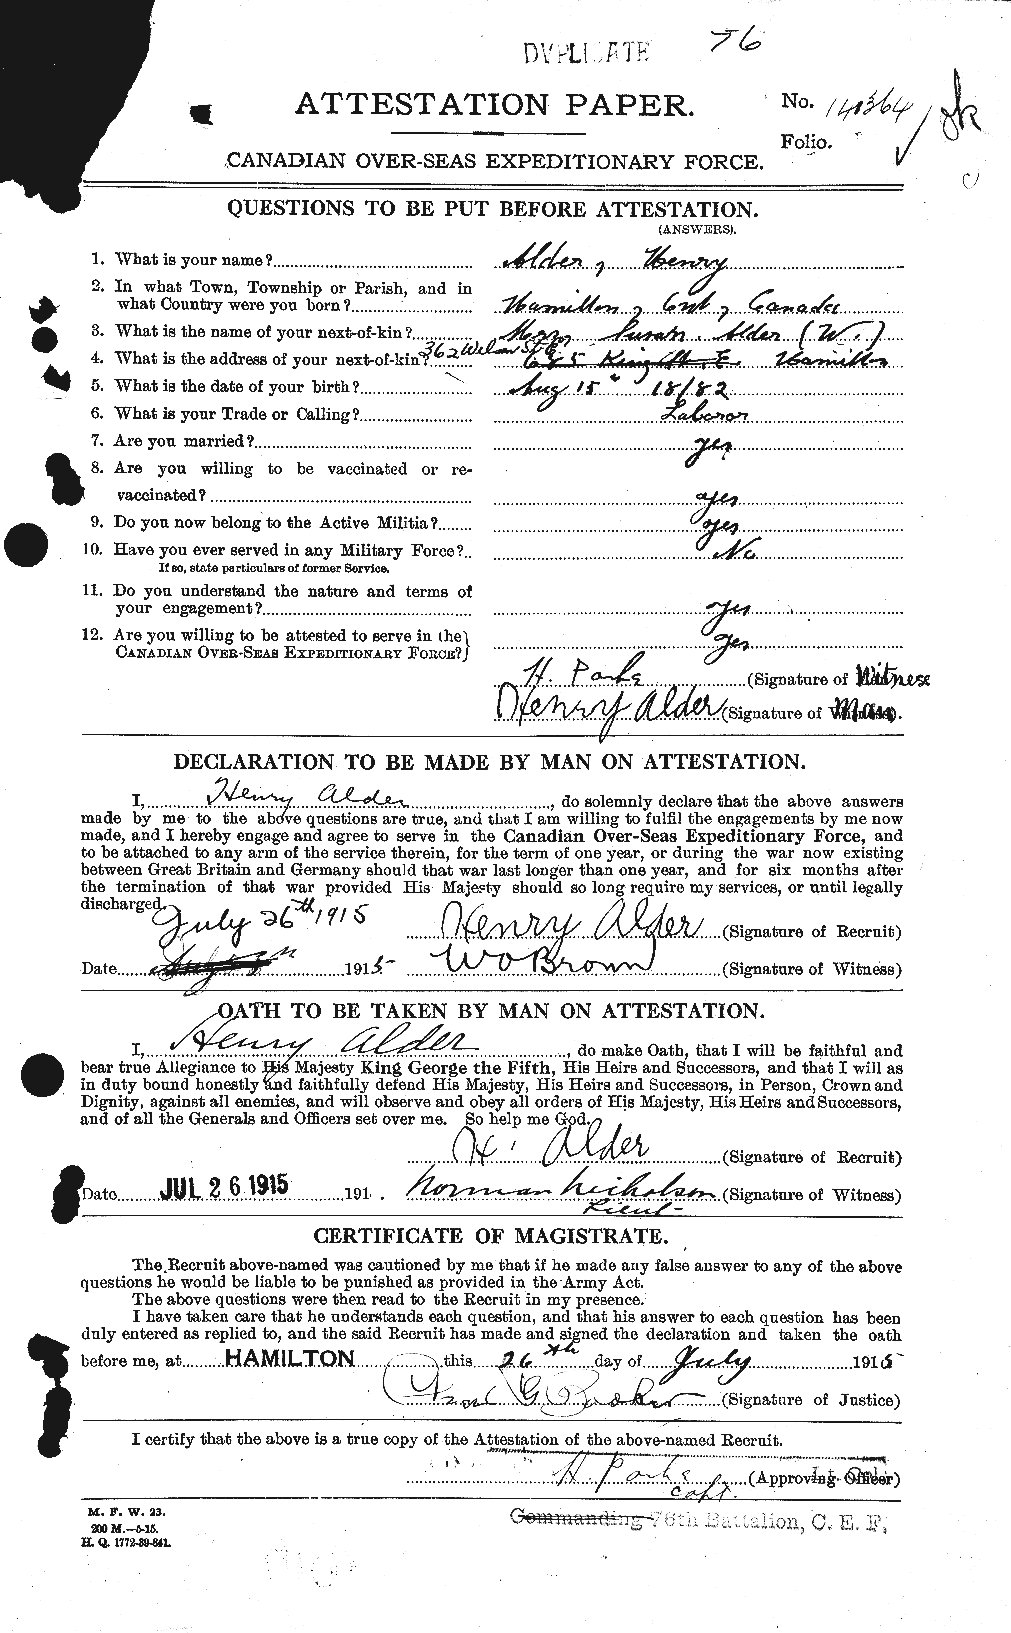 Personnel Records of the First World War - CEF 204819a